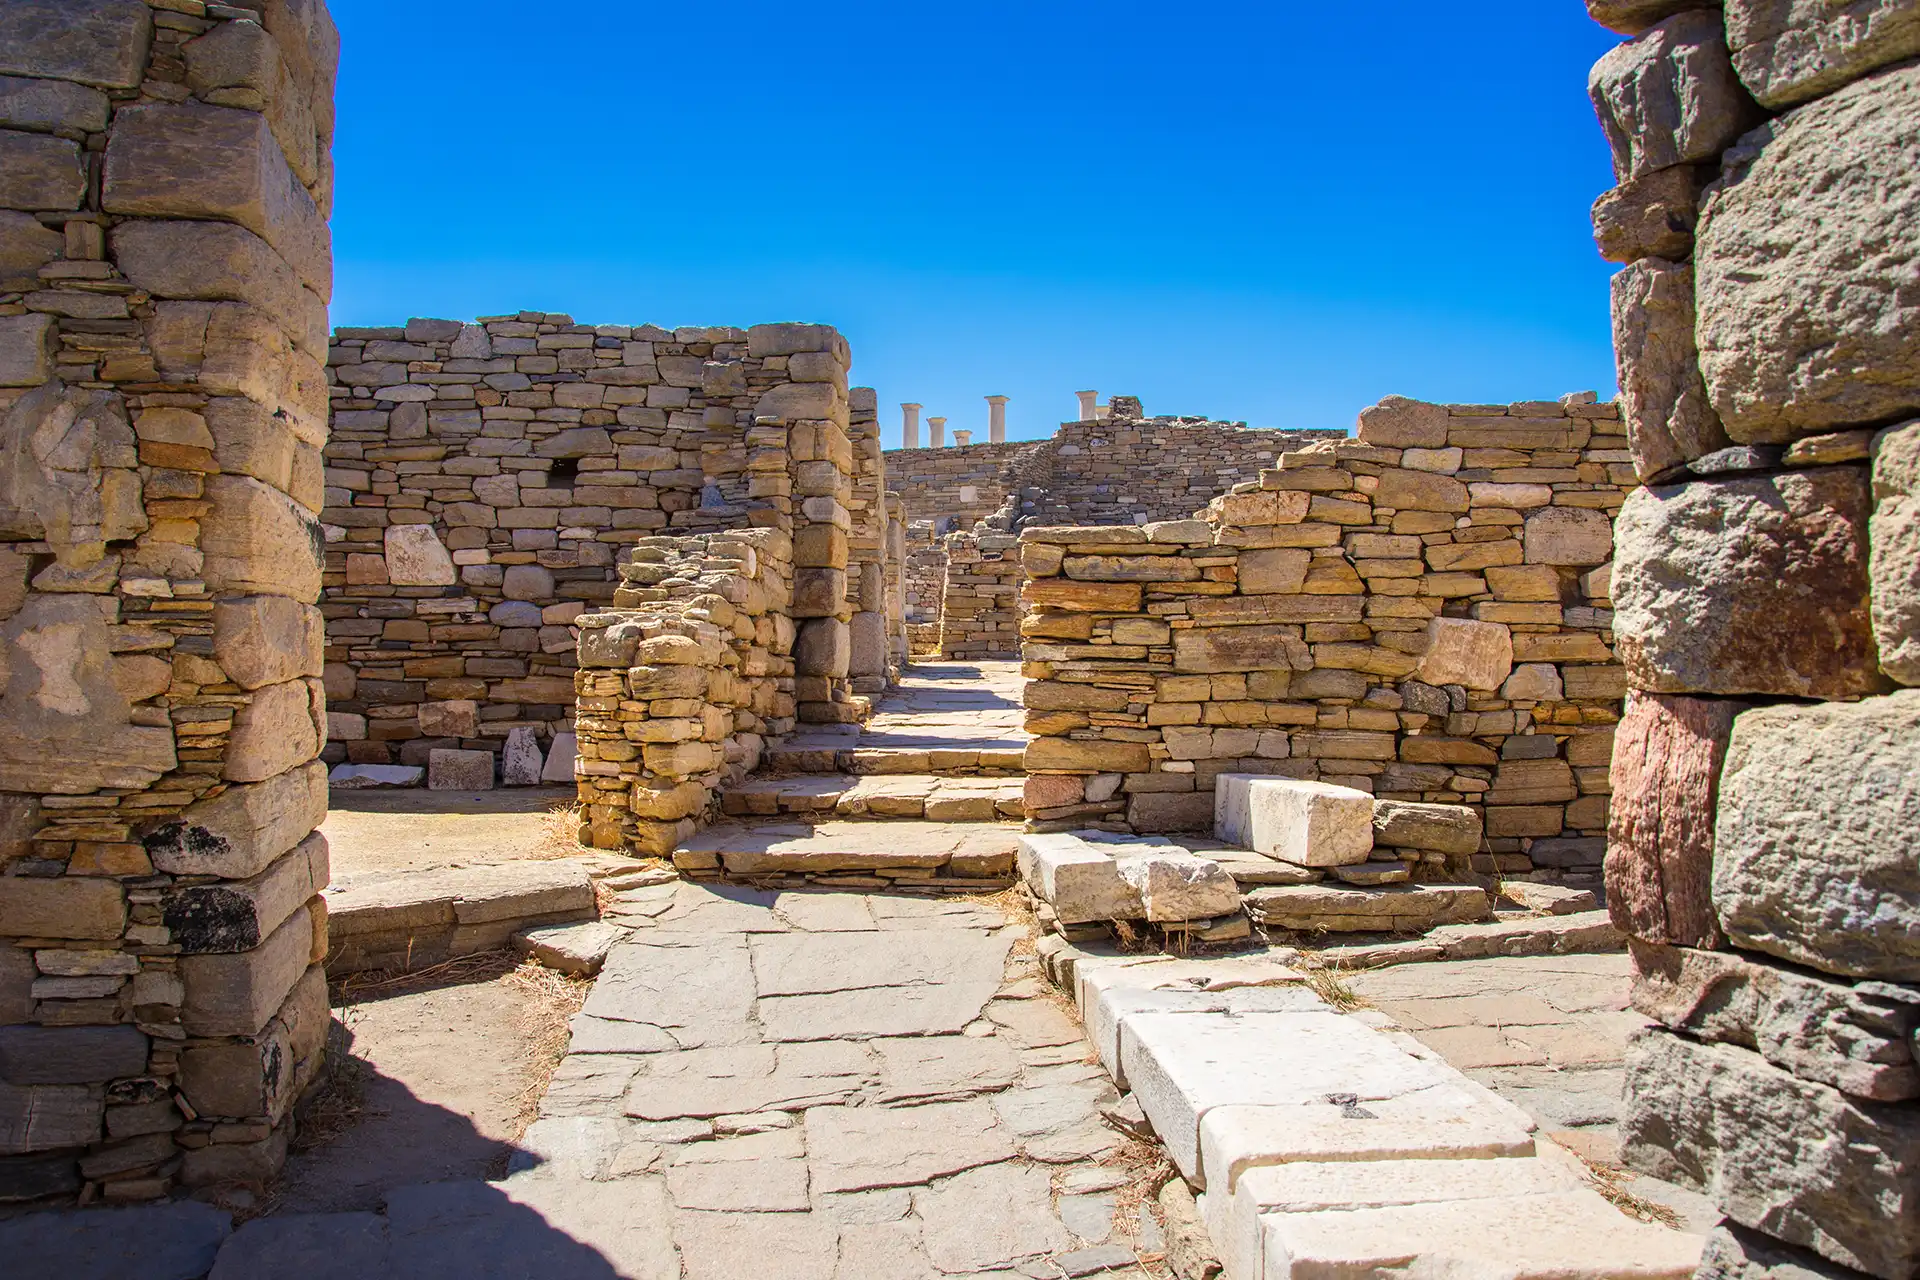 Ancient ruins in the island of Delos in Cyclades, one of the most important mythological, historical and archaeological sites in Greece.